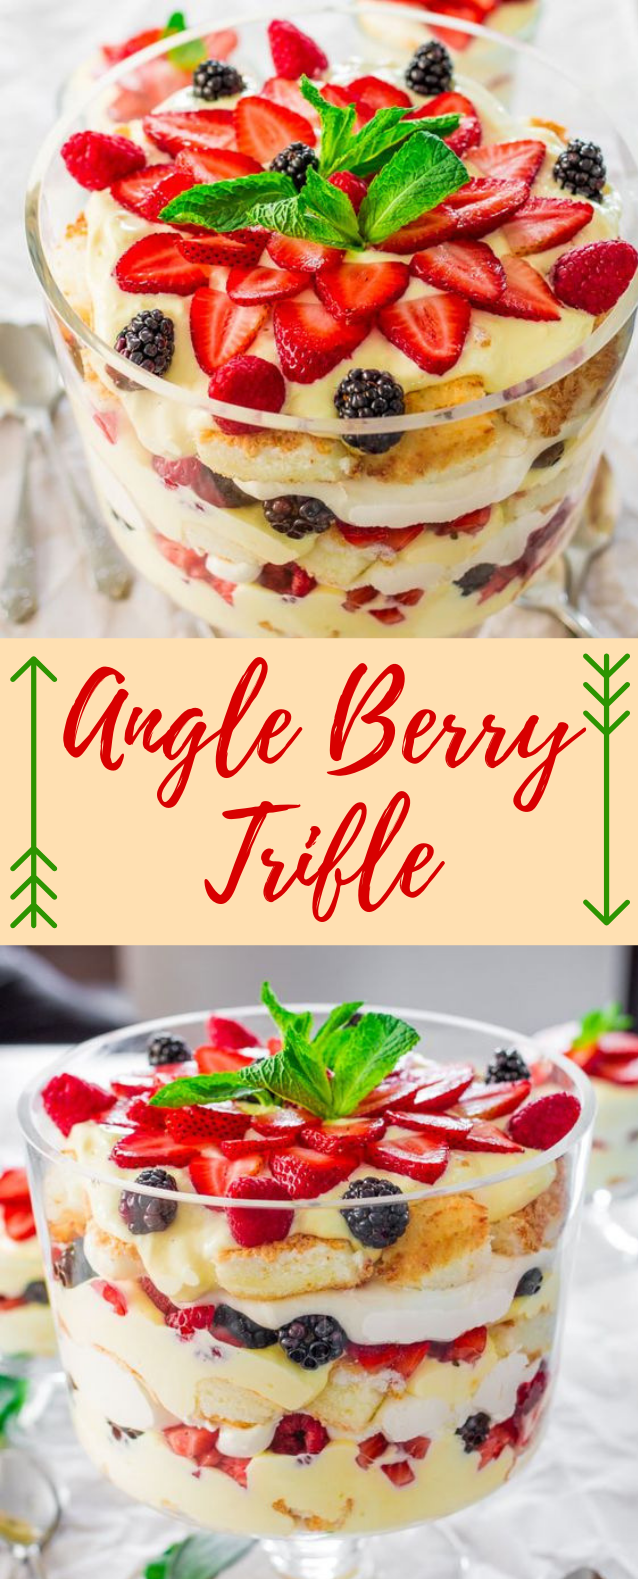 ANGEL BERRY TRIFLE #sweets #pudding